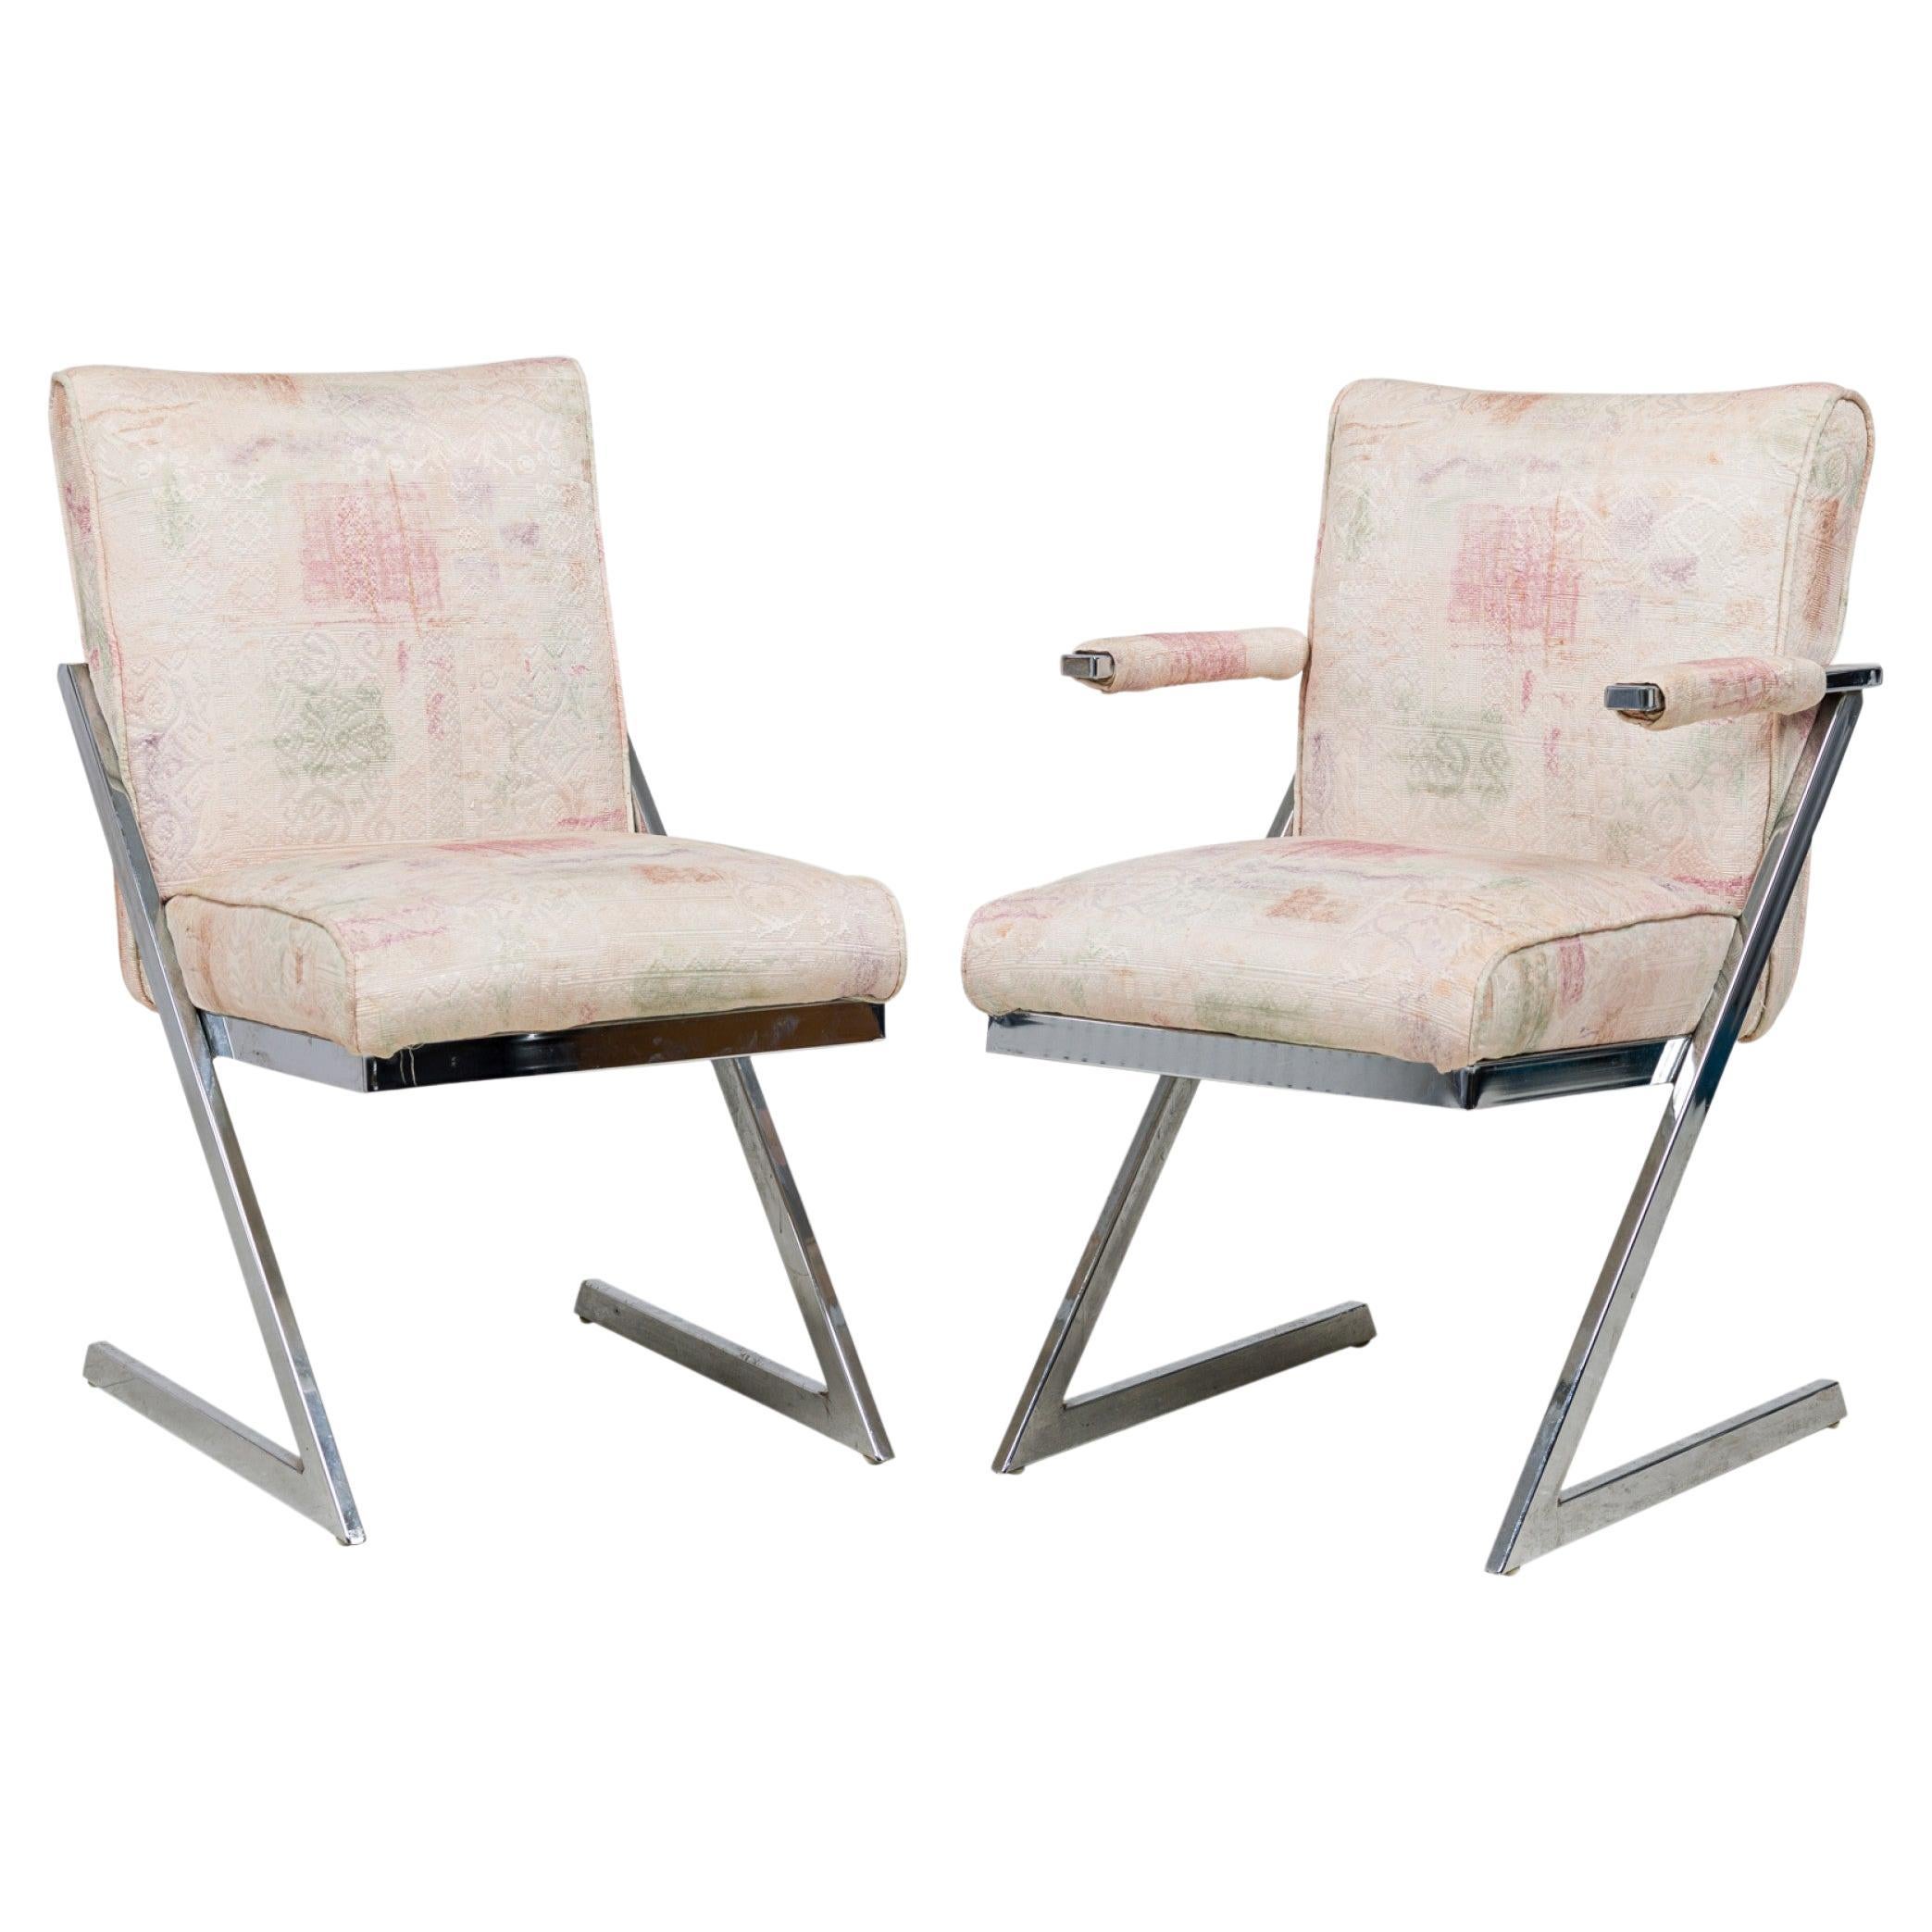 Set of 6 Dia Midcentury American Chrome Z Chairs in Beige and Pastel Upholstery For Sale